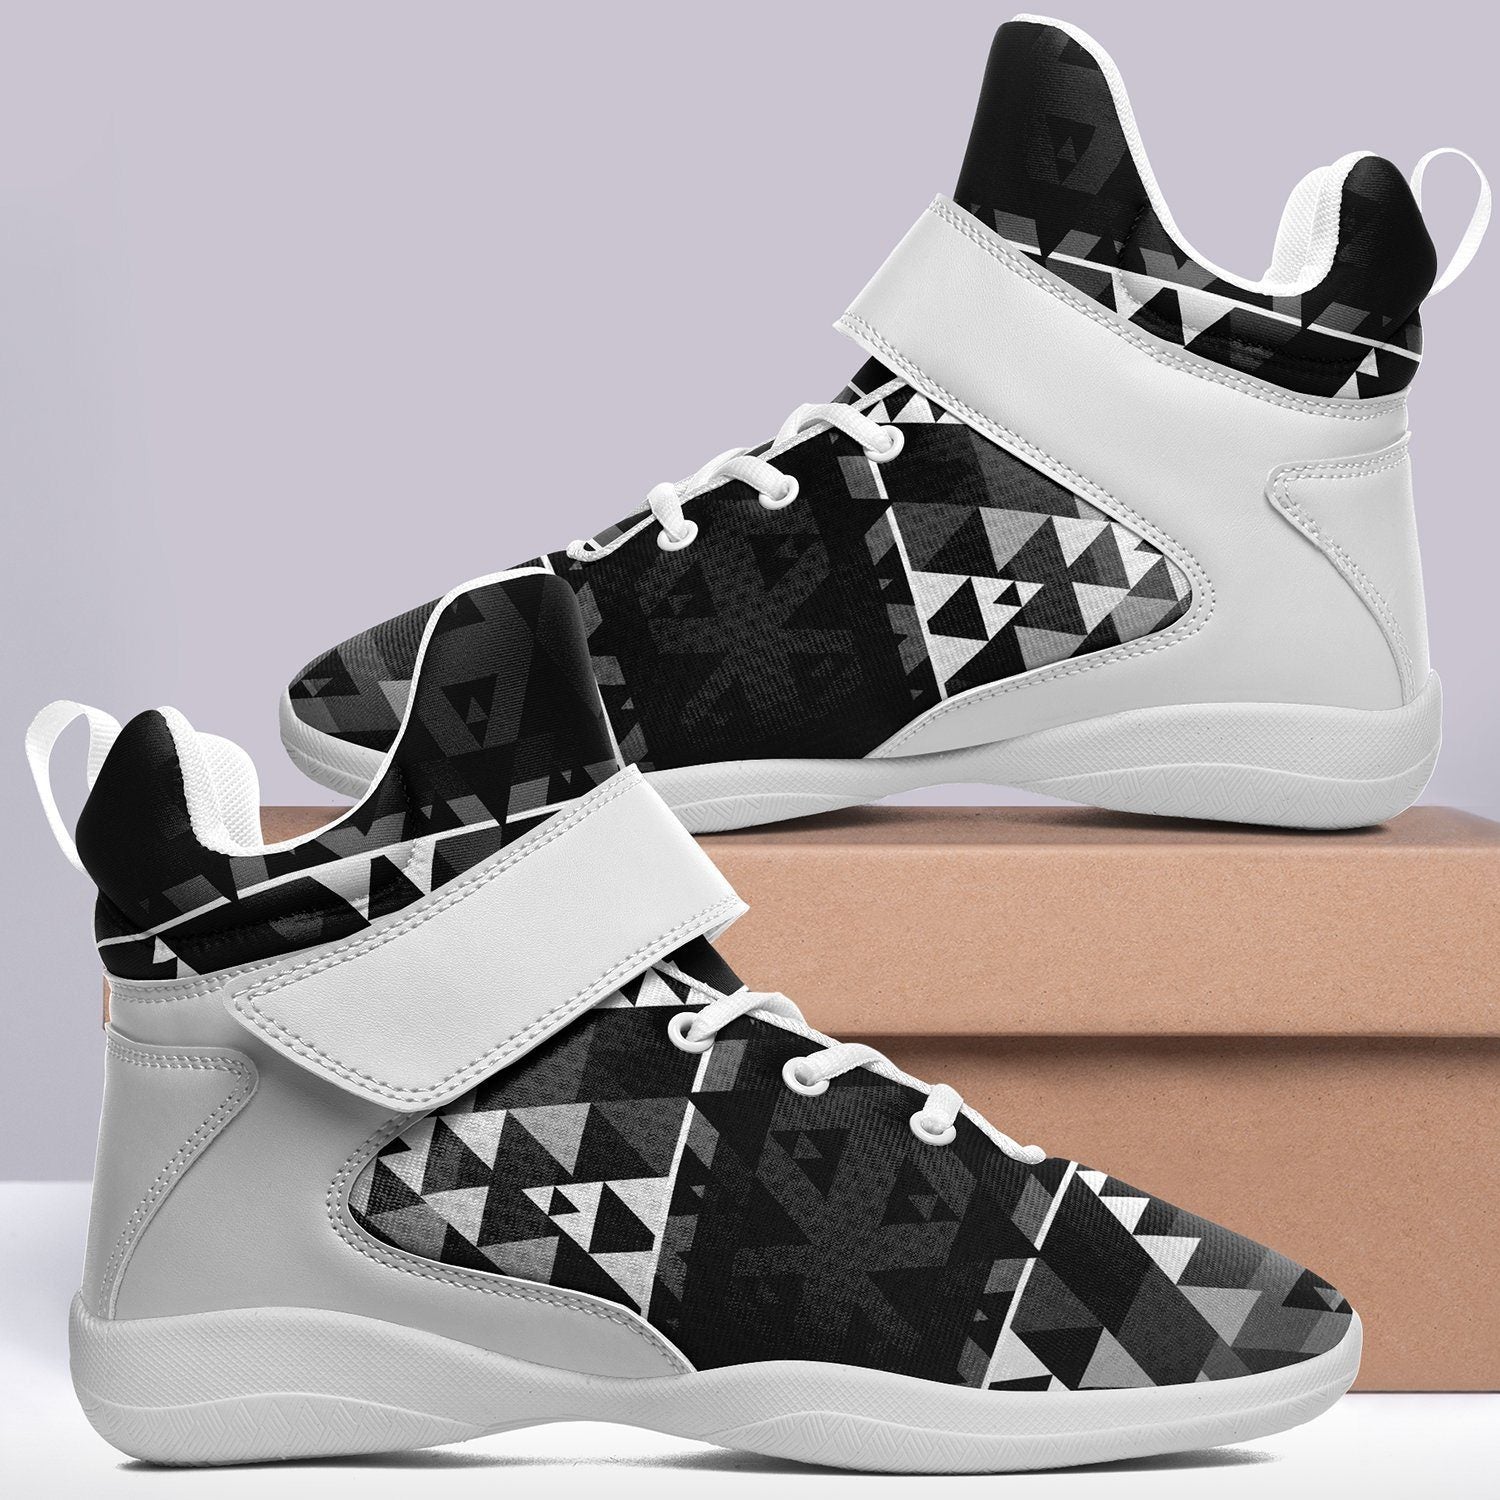 Writing on Stone Black and White Kid's Ipottaa Basketball / Sport High Top Shoes 49 Dzine 